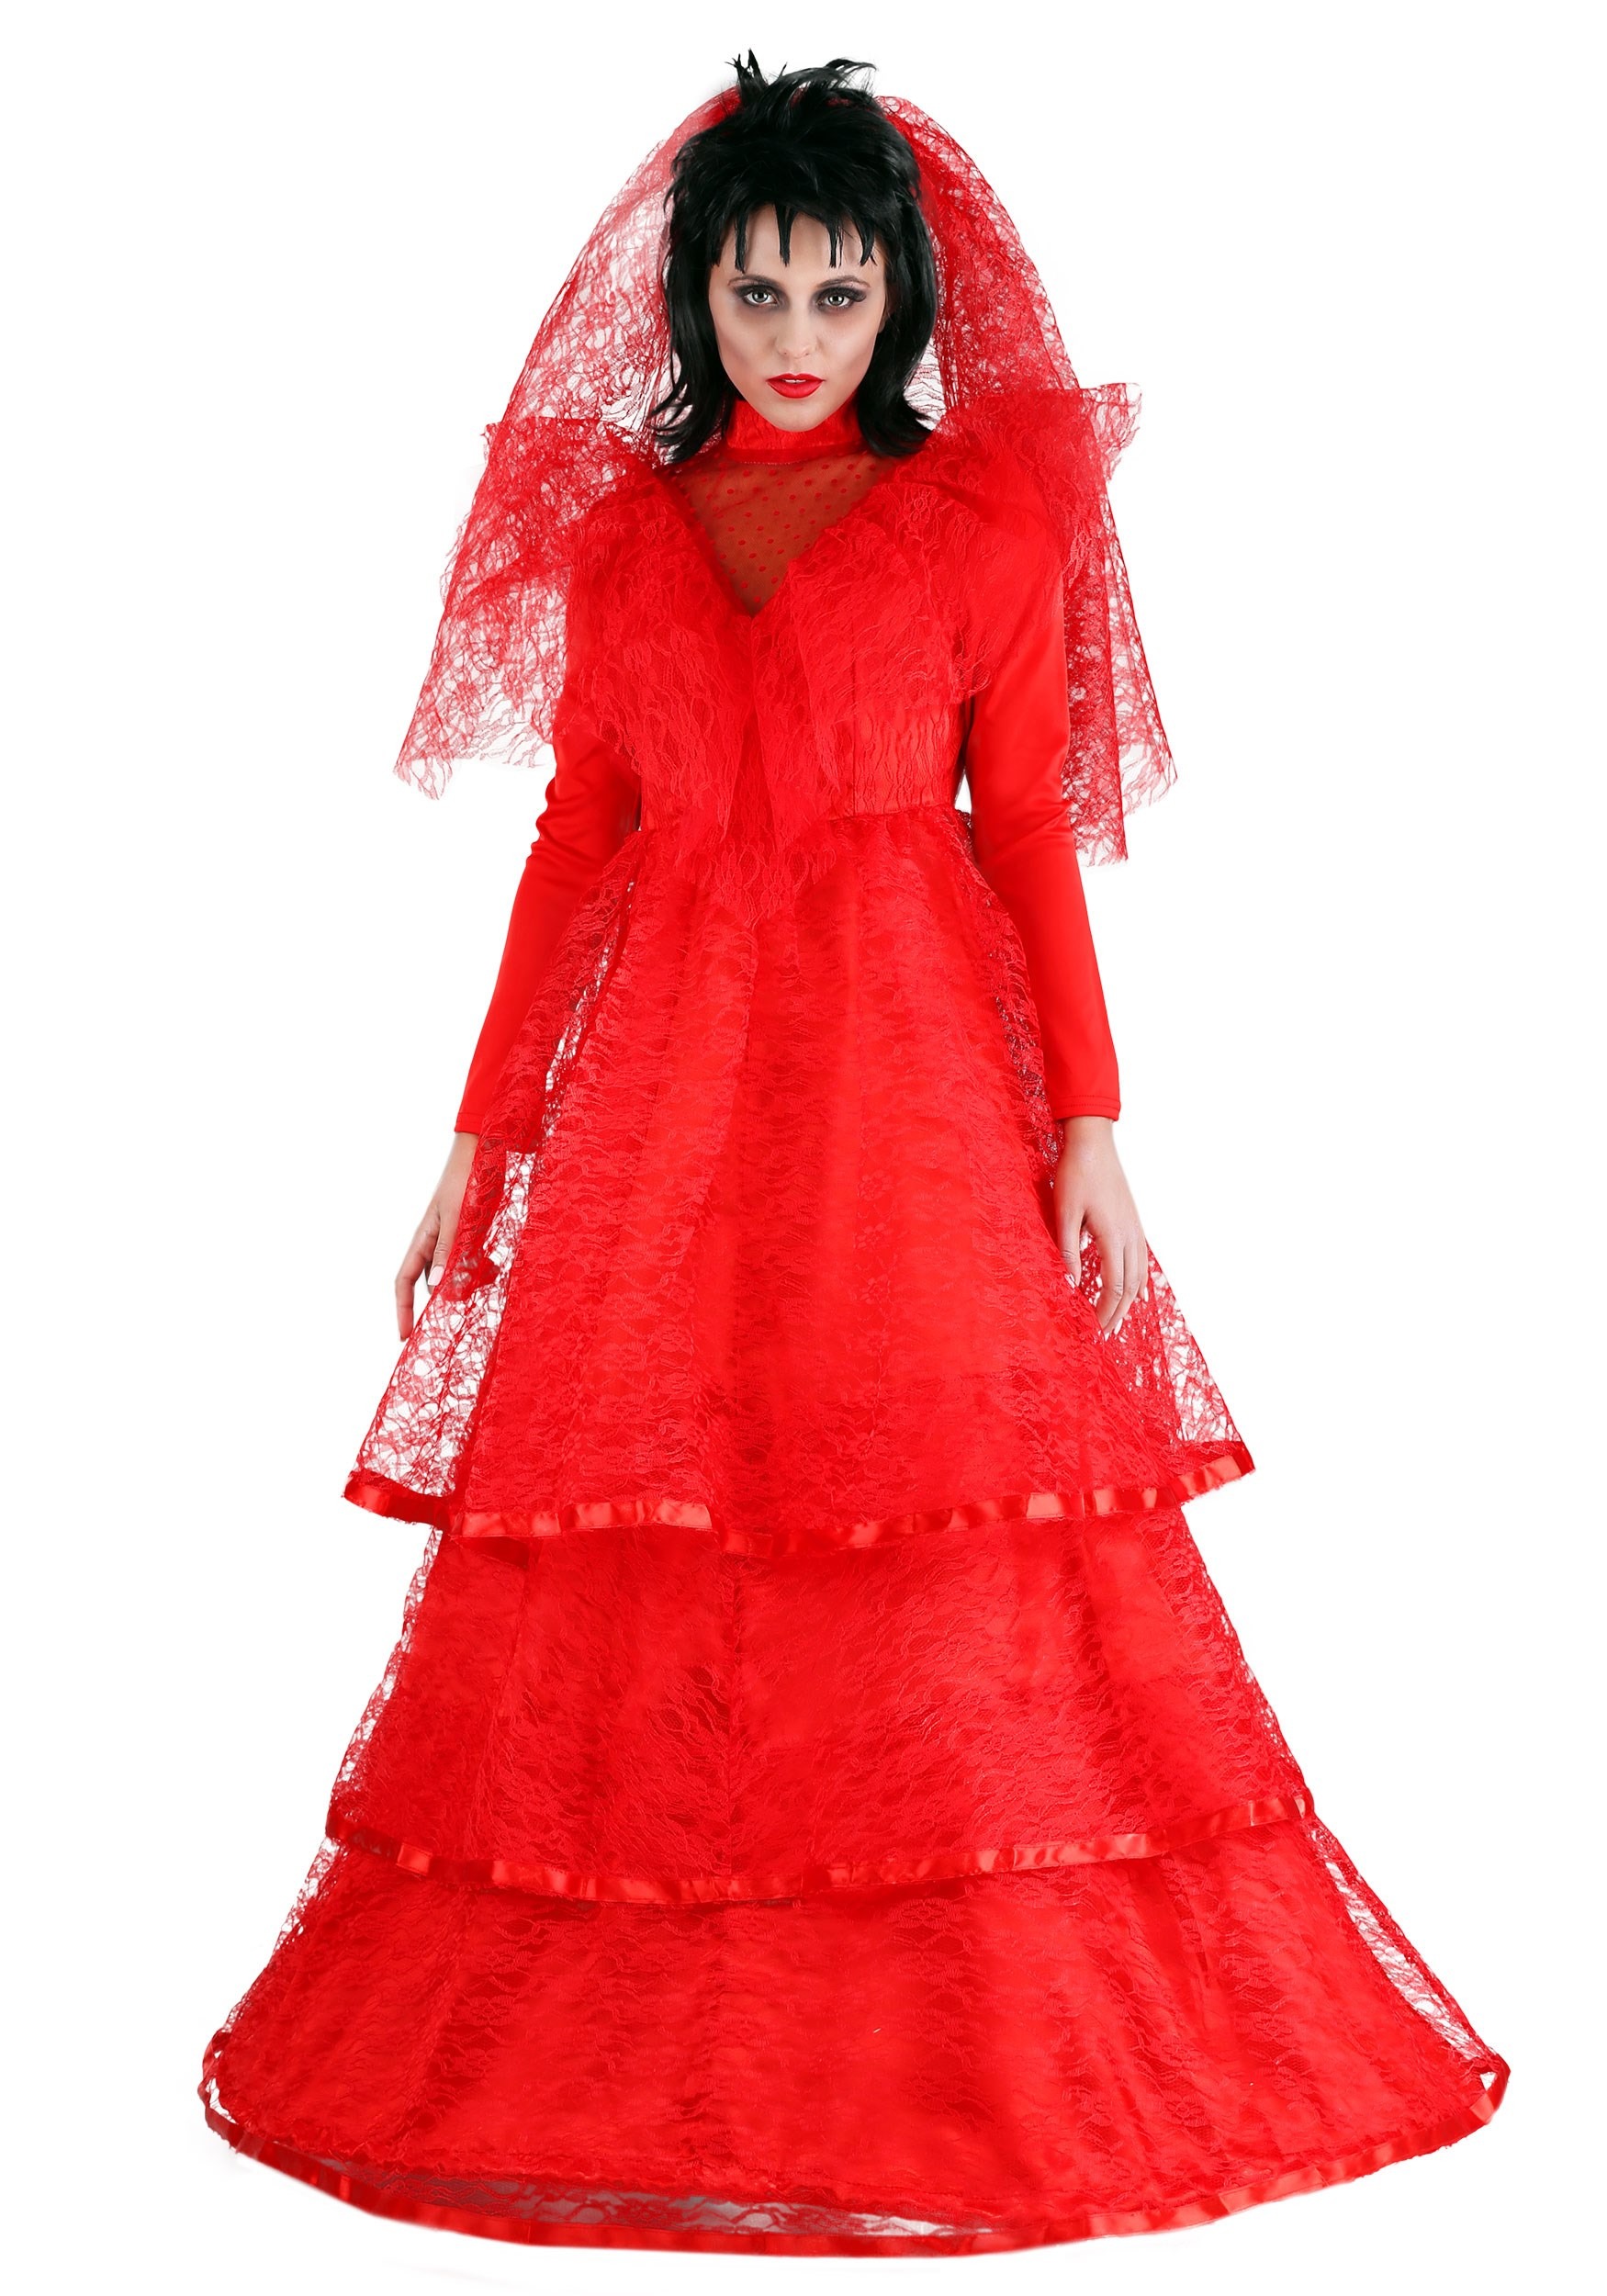 Red Gothic Plus Size Wedding Dress Costume for Women